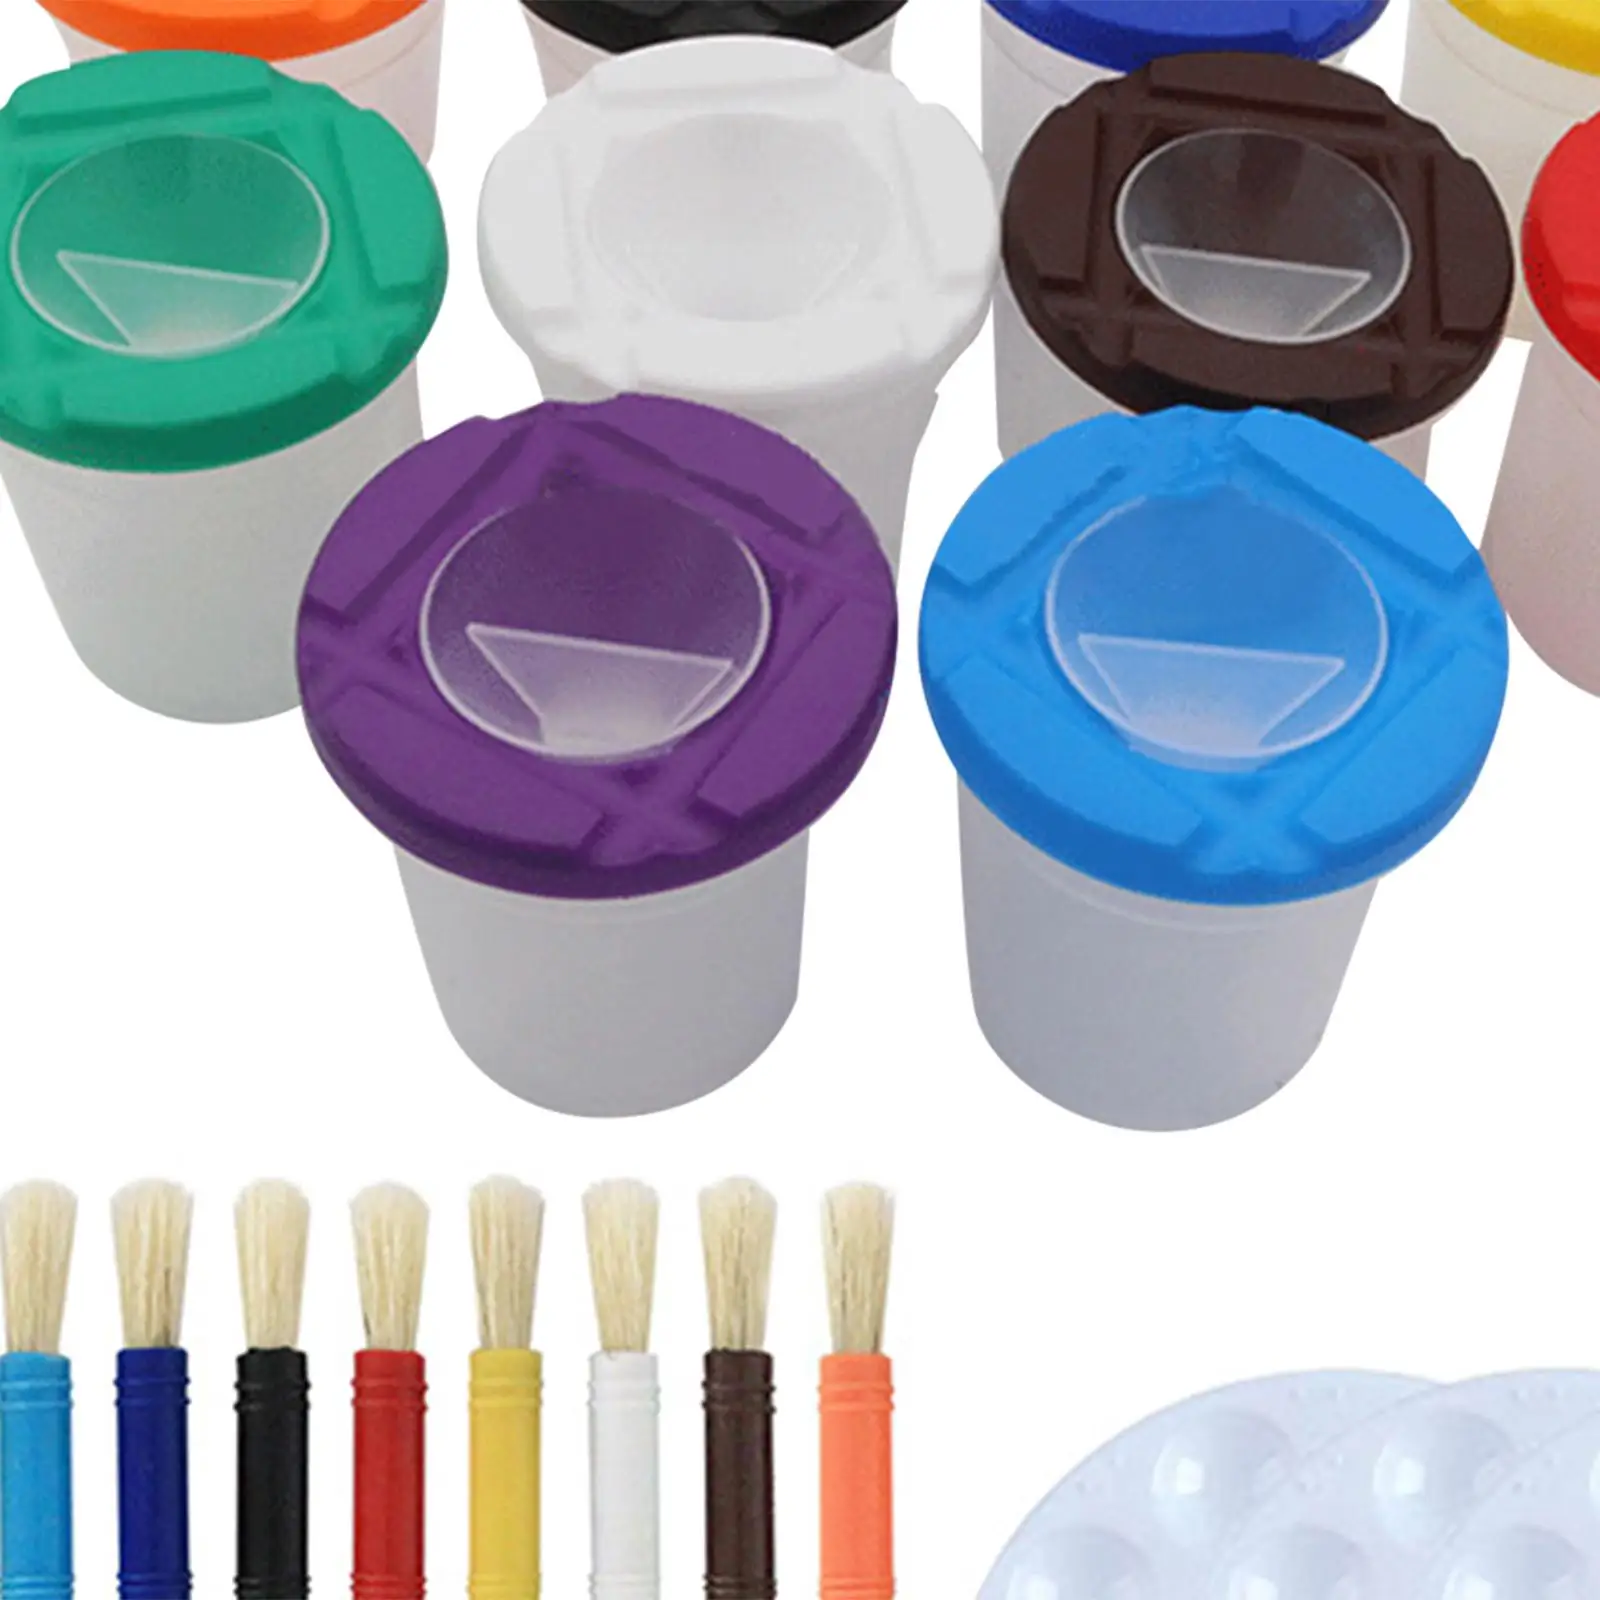 23x Paint Cups and Painting Brushes Painting Tool Pen Washing Cups Round Paintbrushes for Child Young Artist Beginners DIY